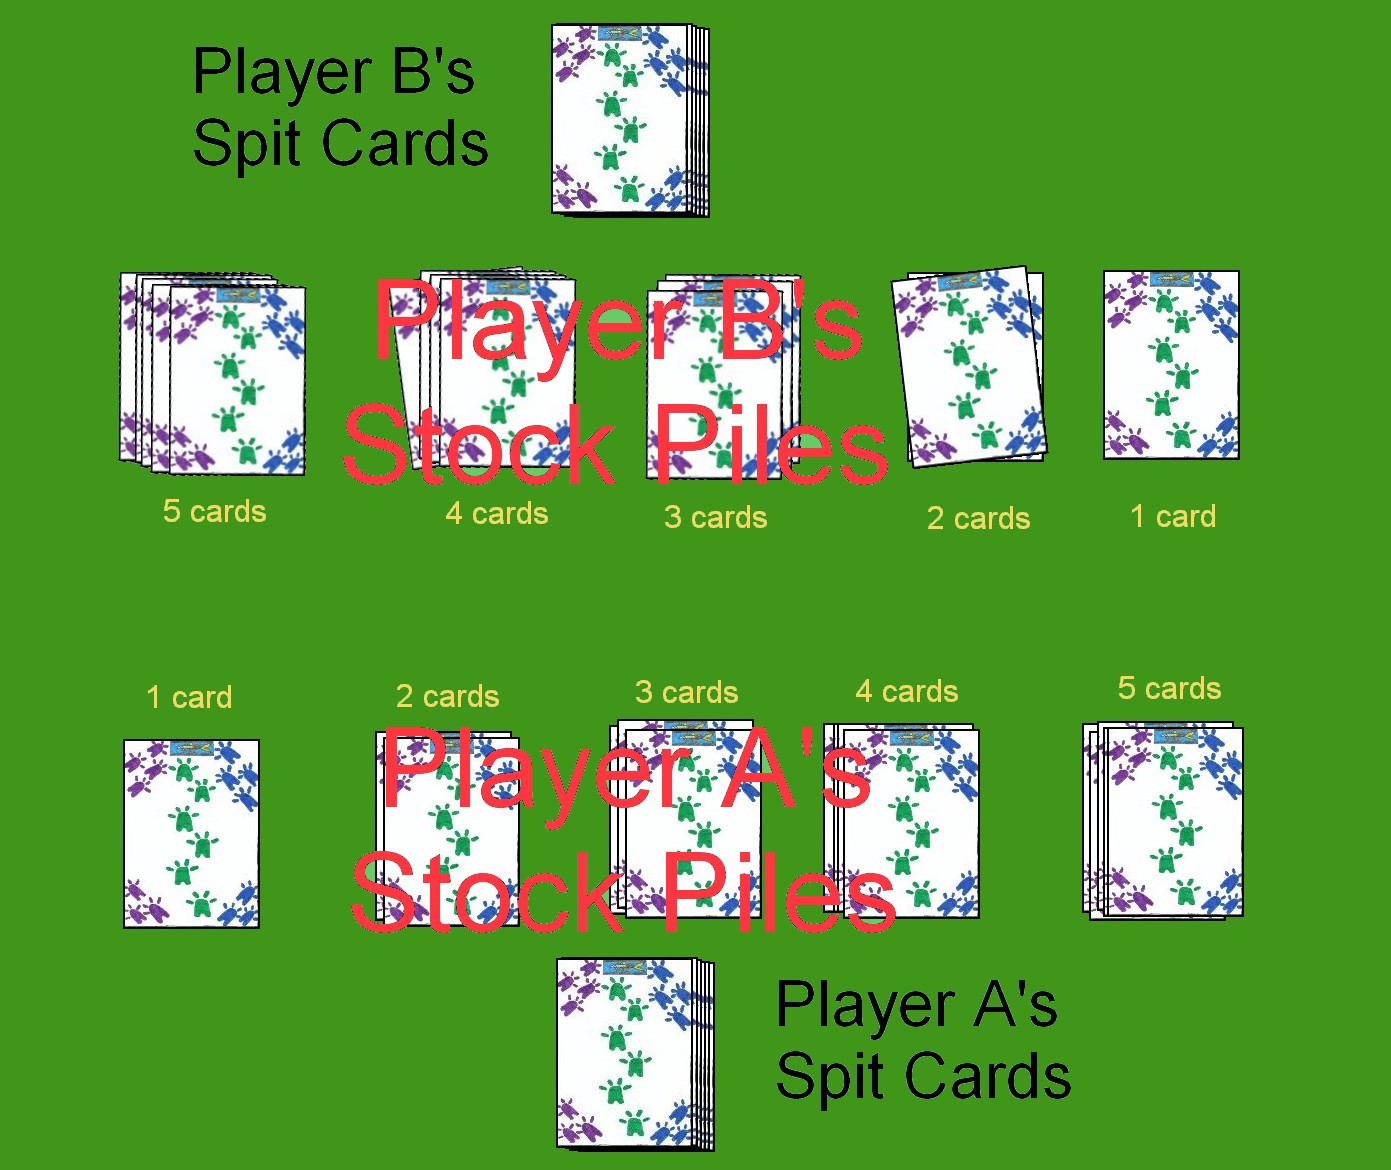 Initial Layout for the Card Game Spit